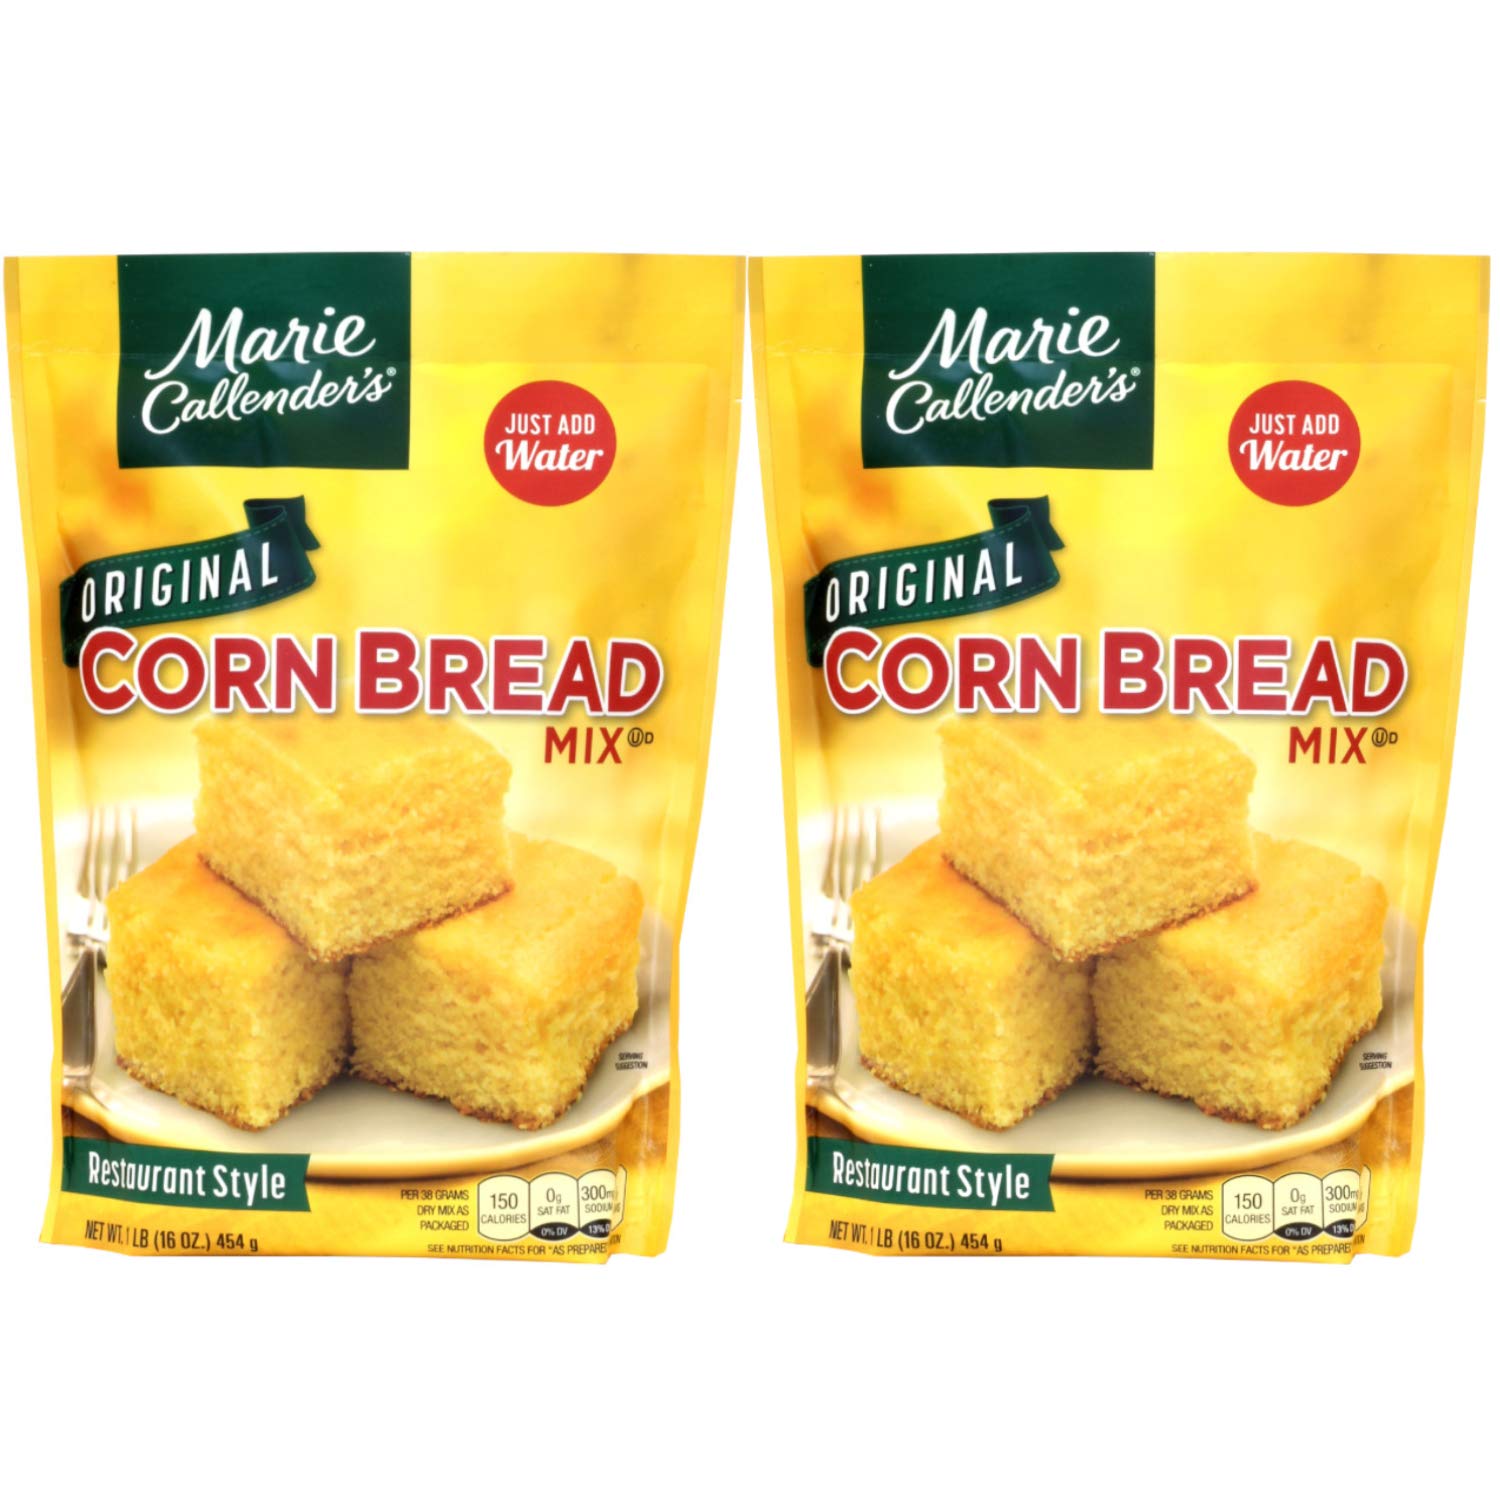 Marie Callender’s CornBread Mix, Original Flavor, 1LB BAG. Just Add Water, Mix, and Bake. Makes 8” Loaf (Pack of 2)